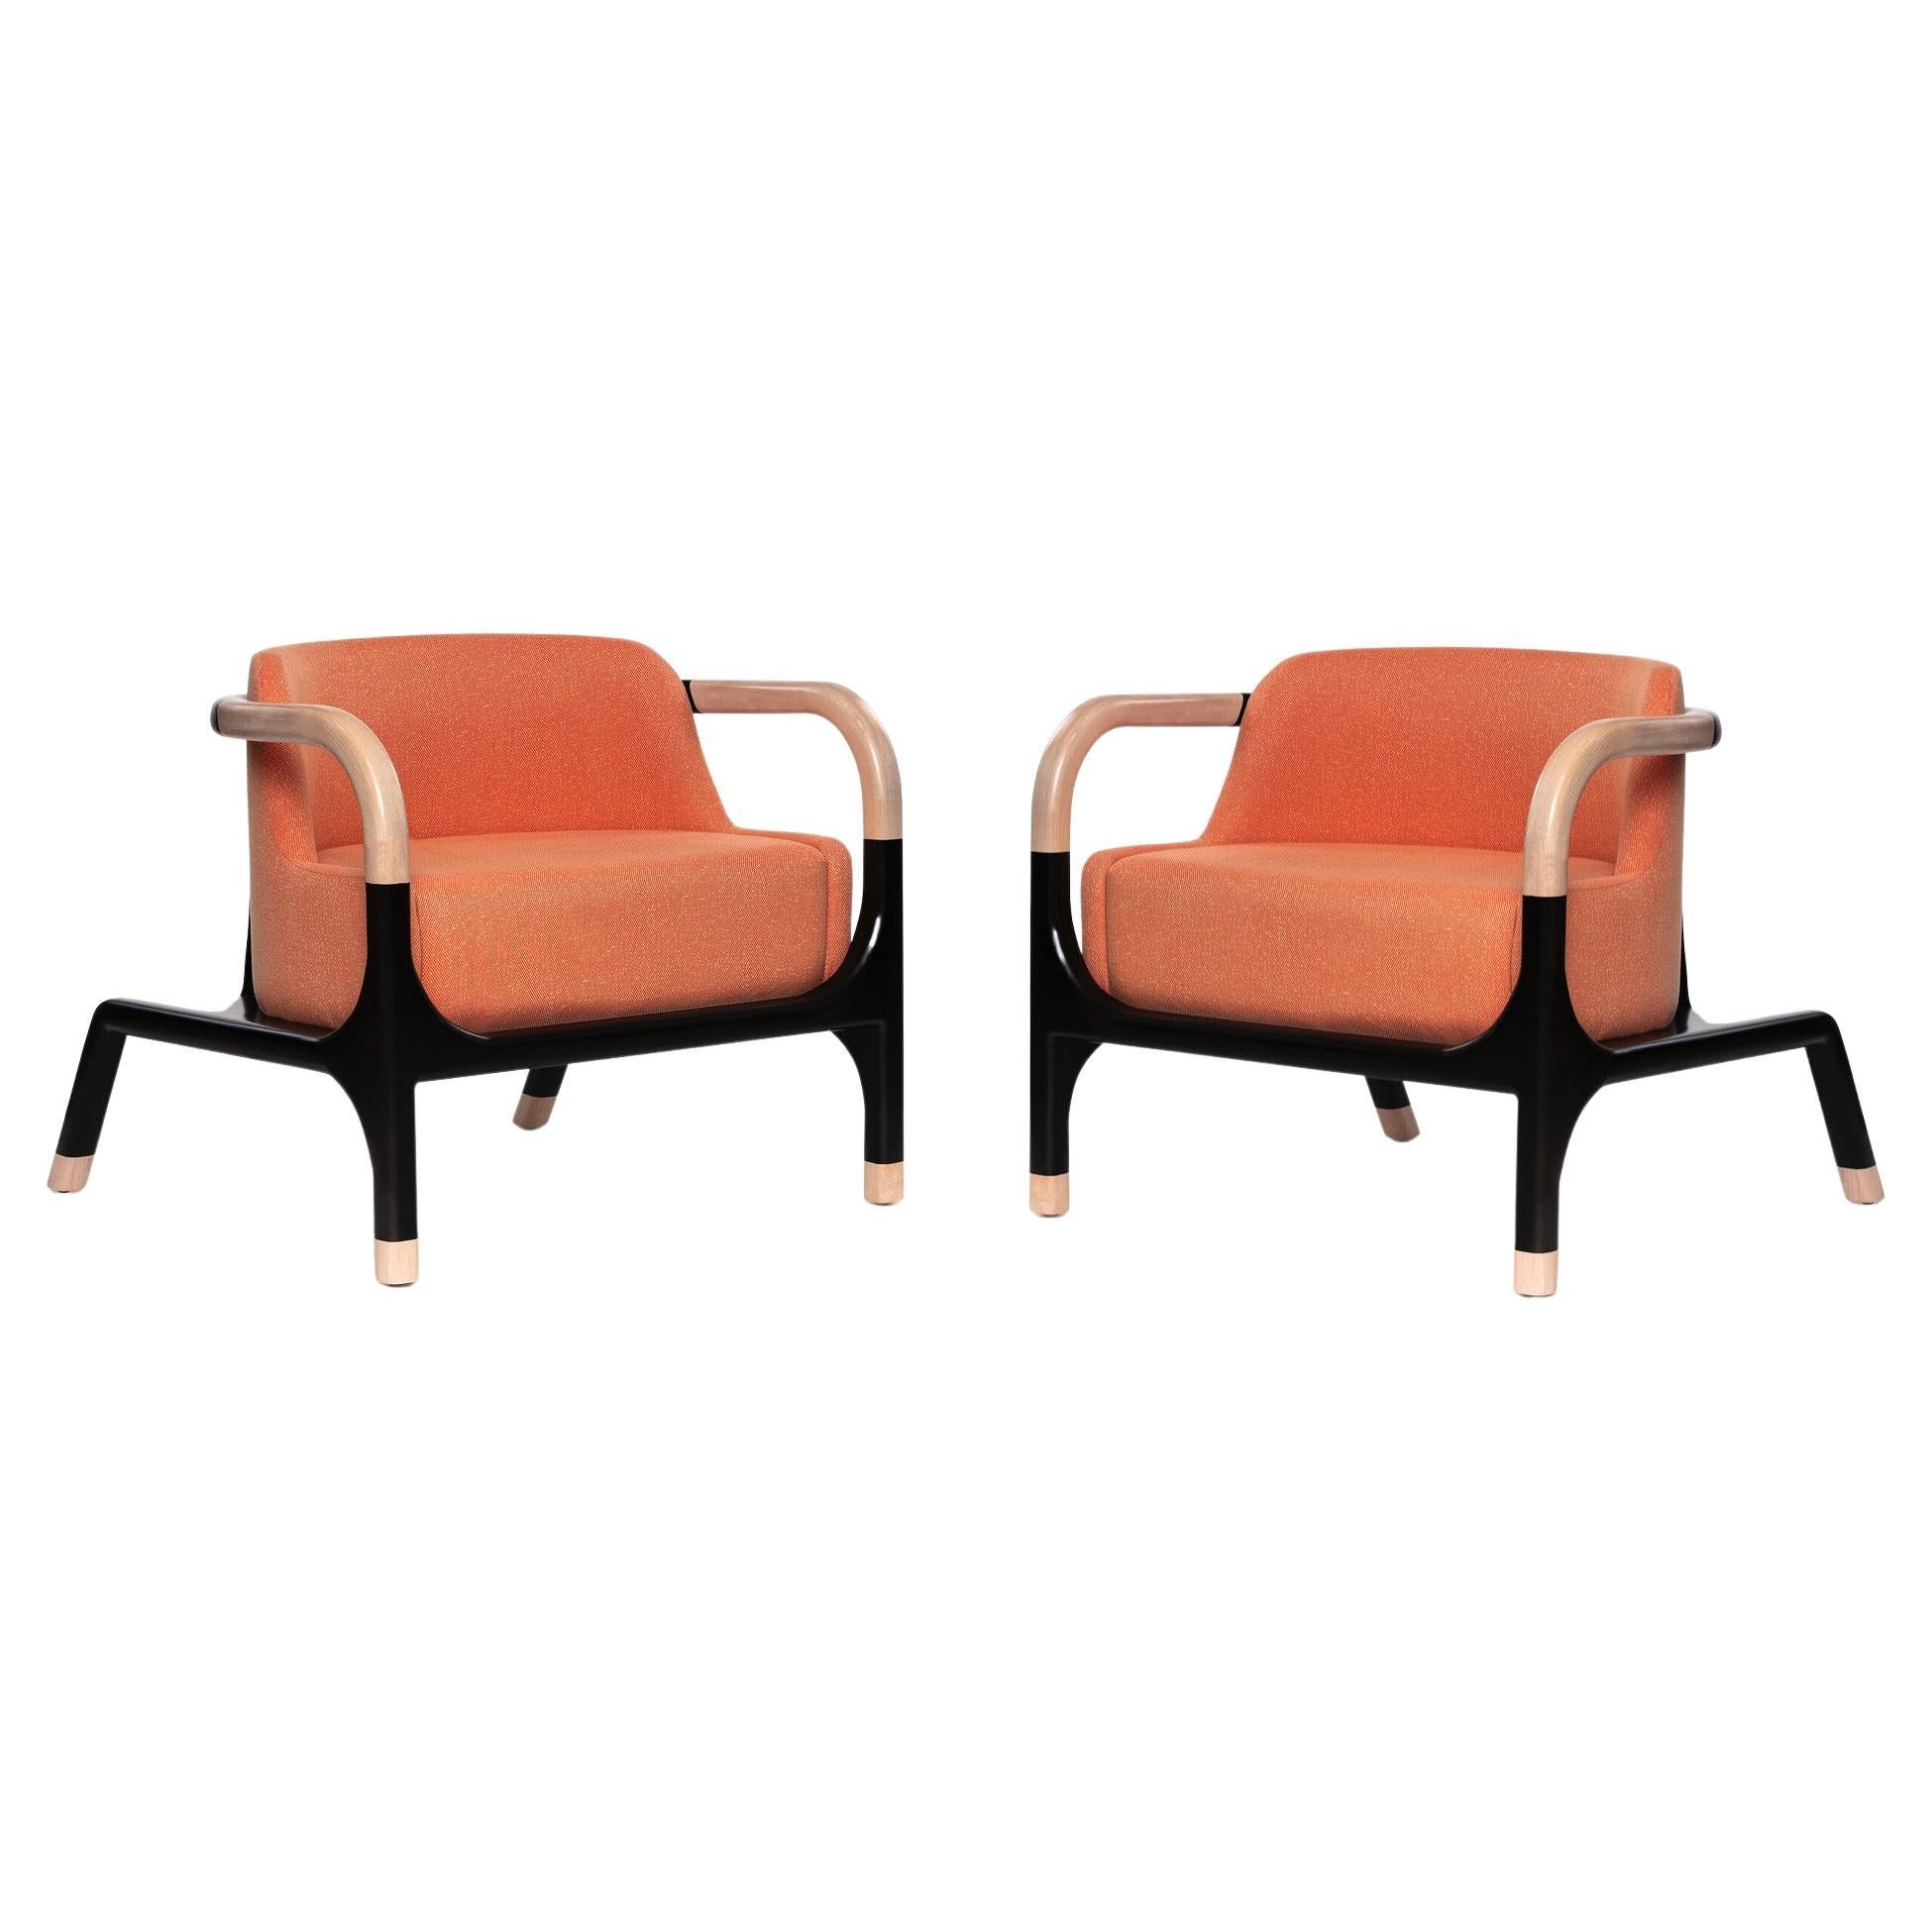 Pair of Contemporary Solid Wood Armchair Upholstered in Textile and Cane